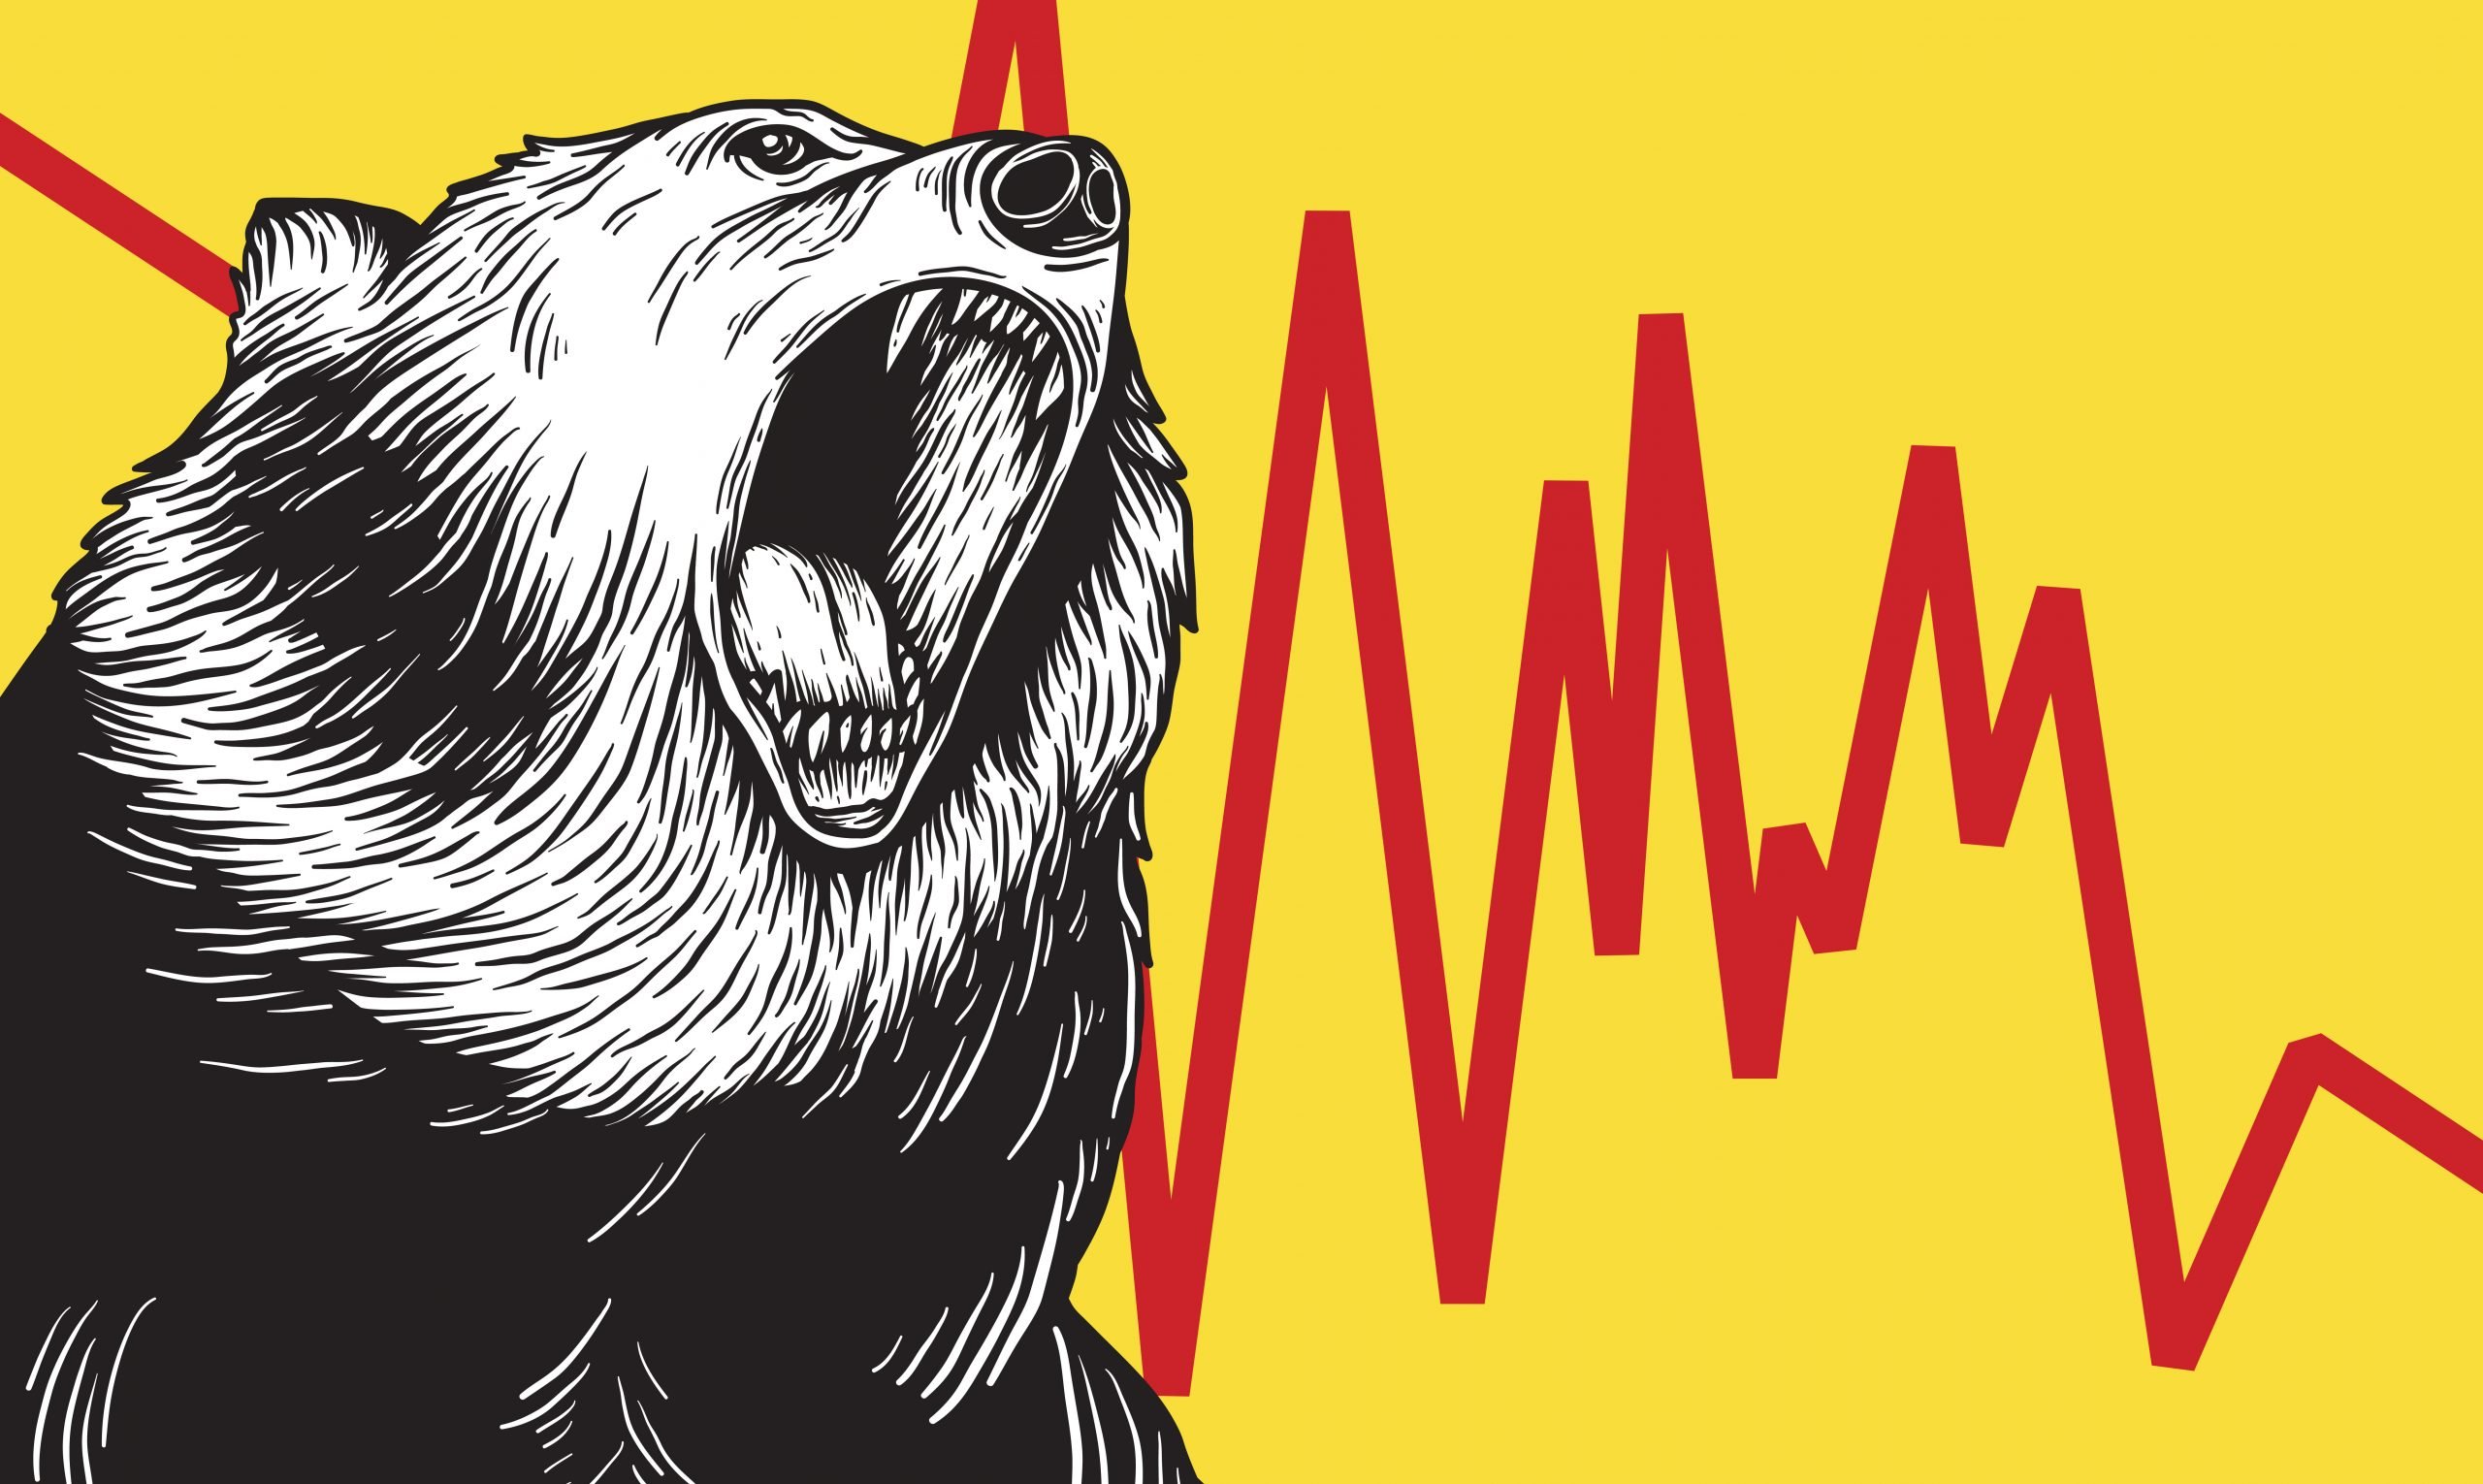 bear illustration related to the bear market